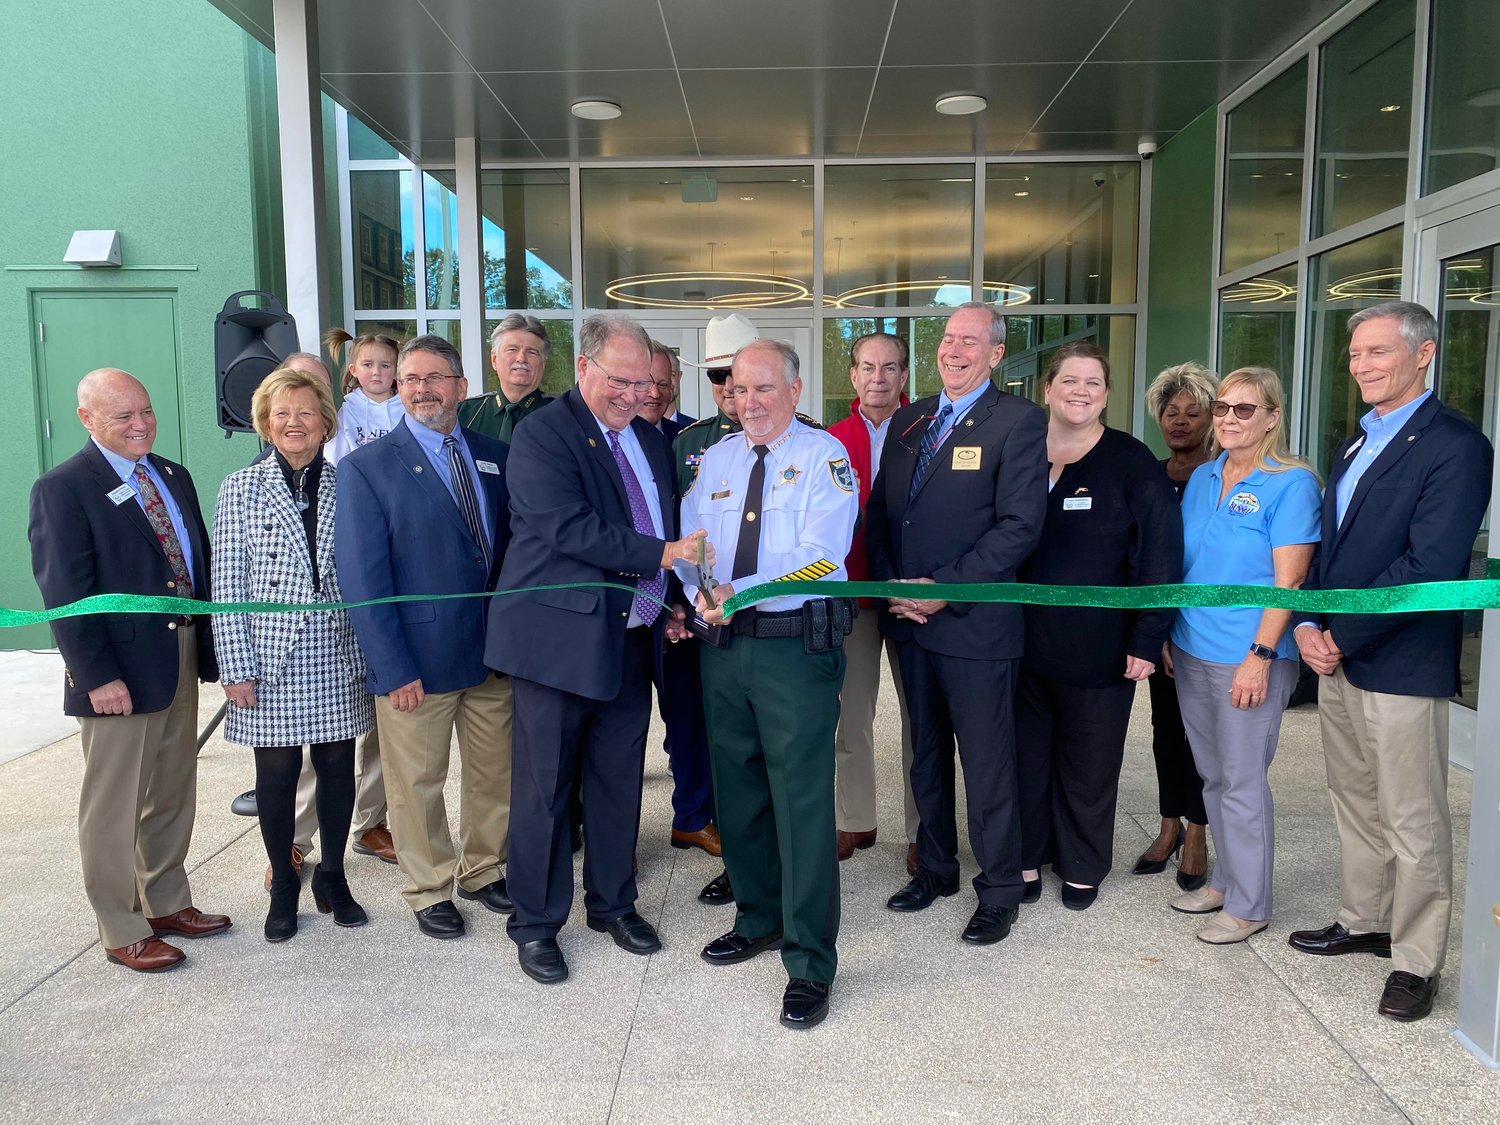 A line of elected officials and FCSO staff kick off a new era. County Commission Chair Greg Hansen and Sheriff Rick Staly are at the forefront, cutting the ribbon.